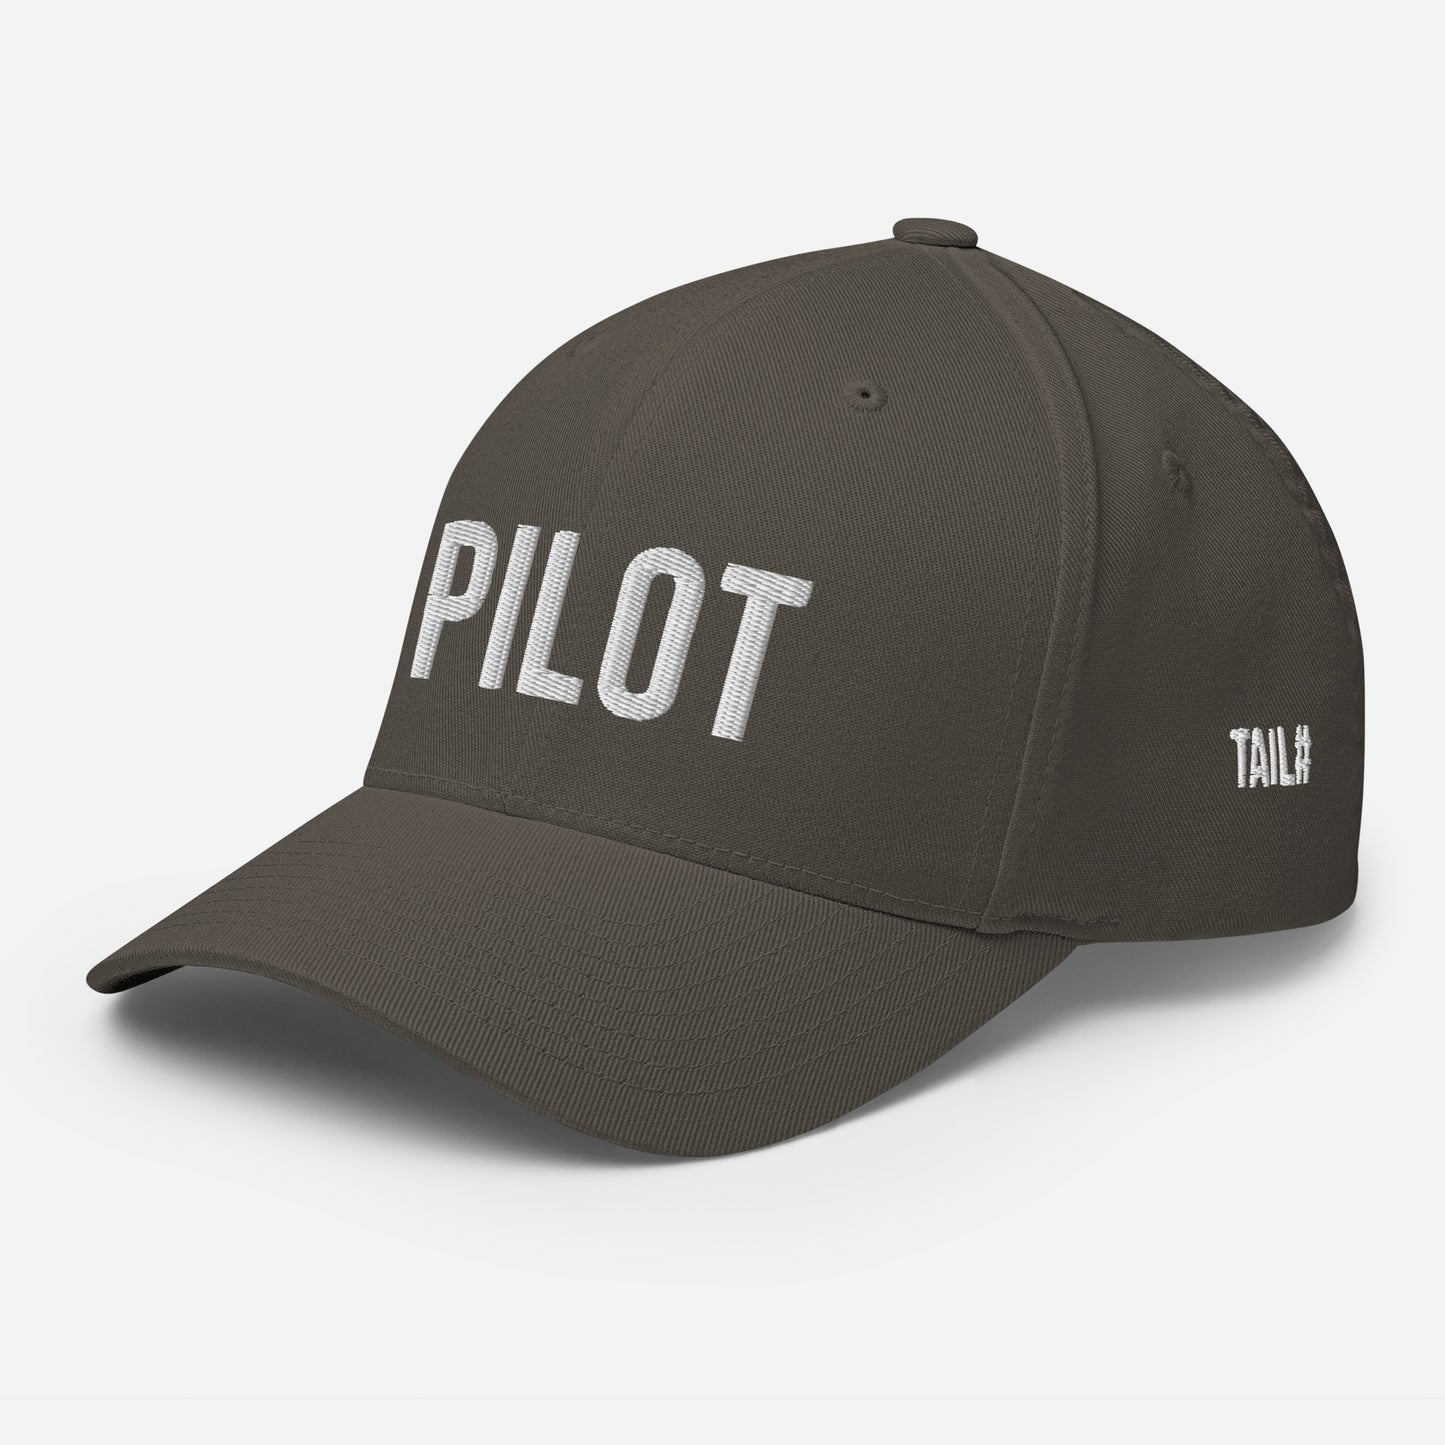 Pilot | Structured Hat | Customized Tail#